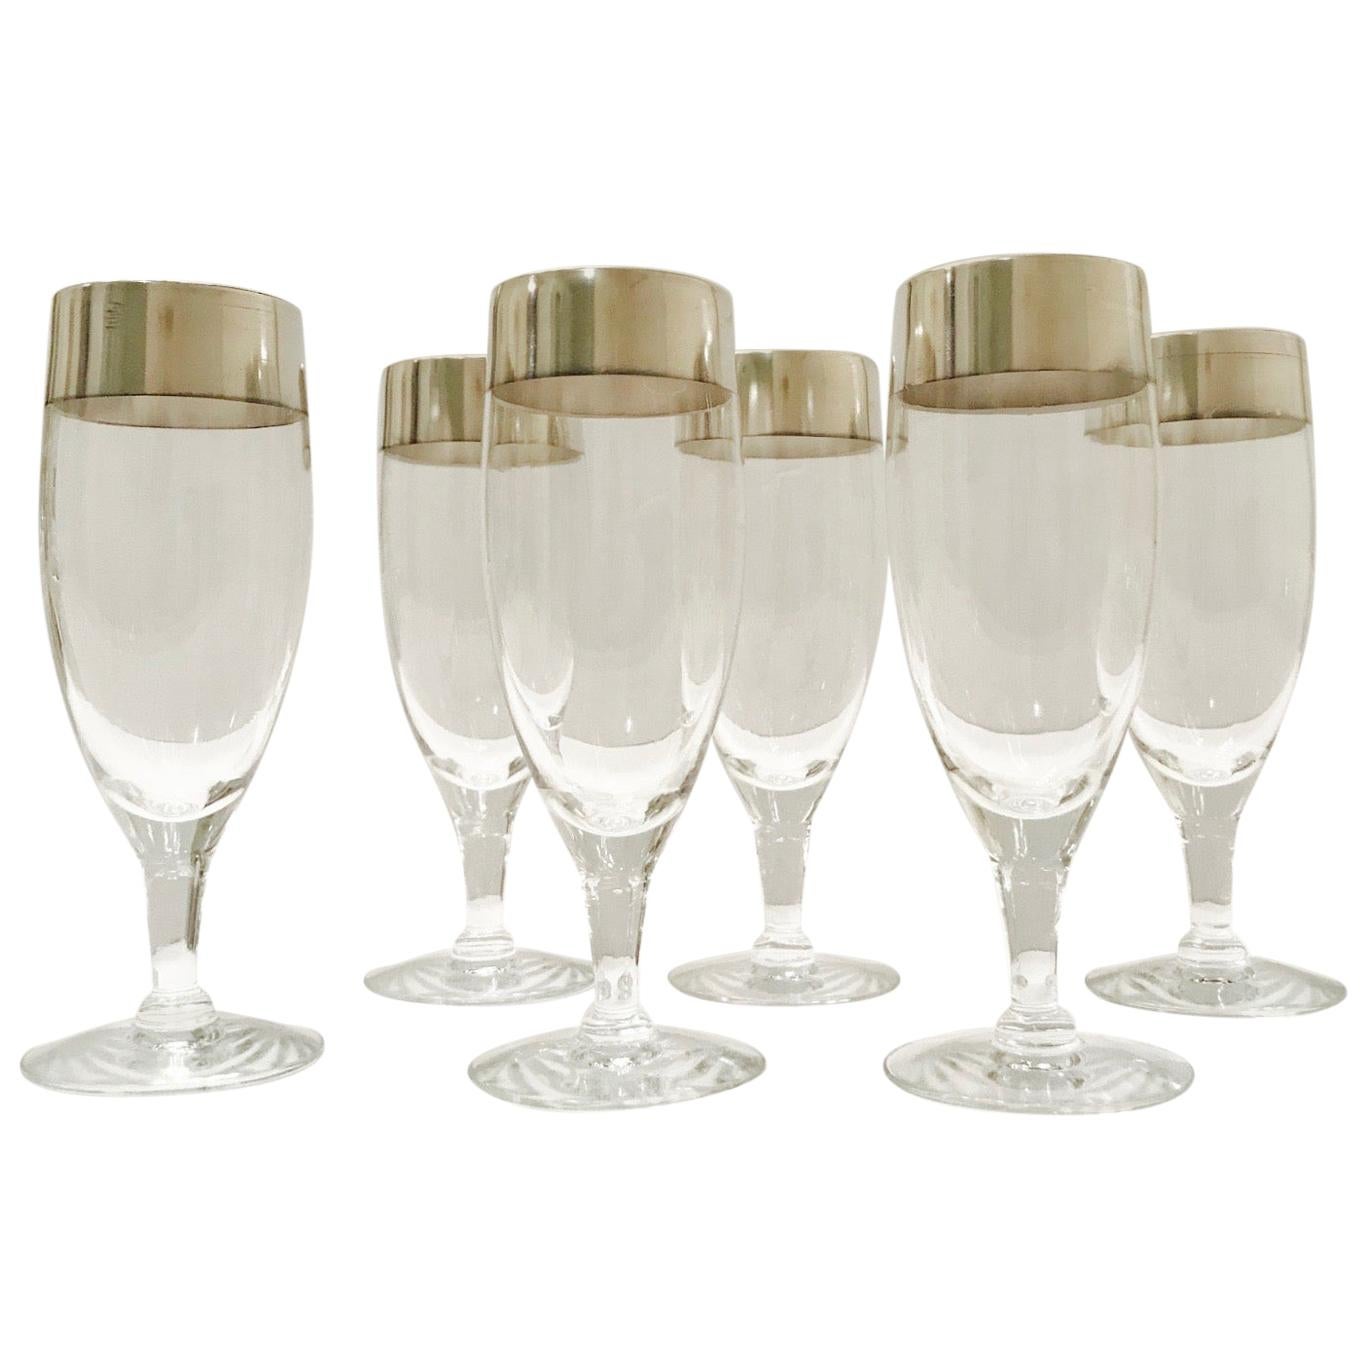 Set of Six Champagne Flutes with Sterling Silver Overlay by Dorothy Thorpe, 1950